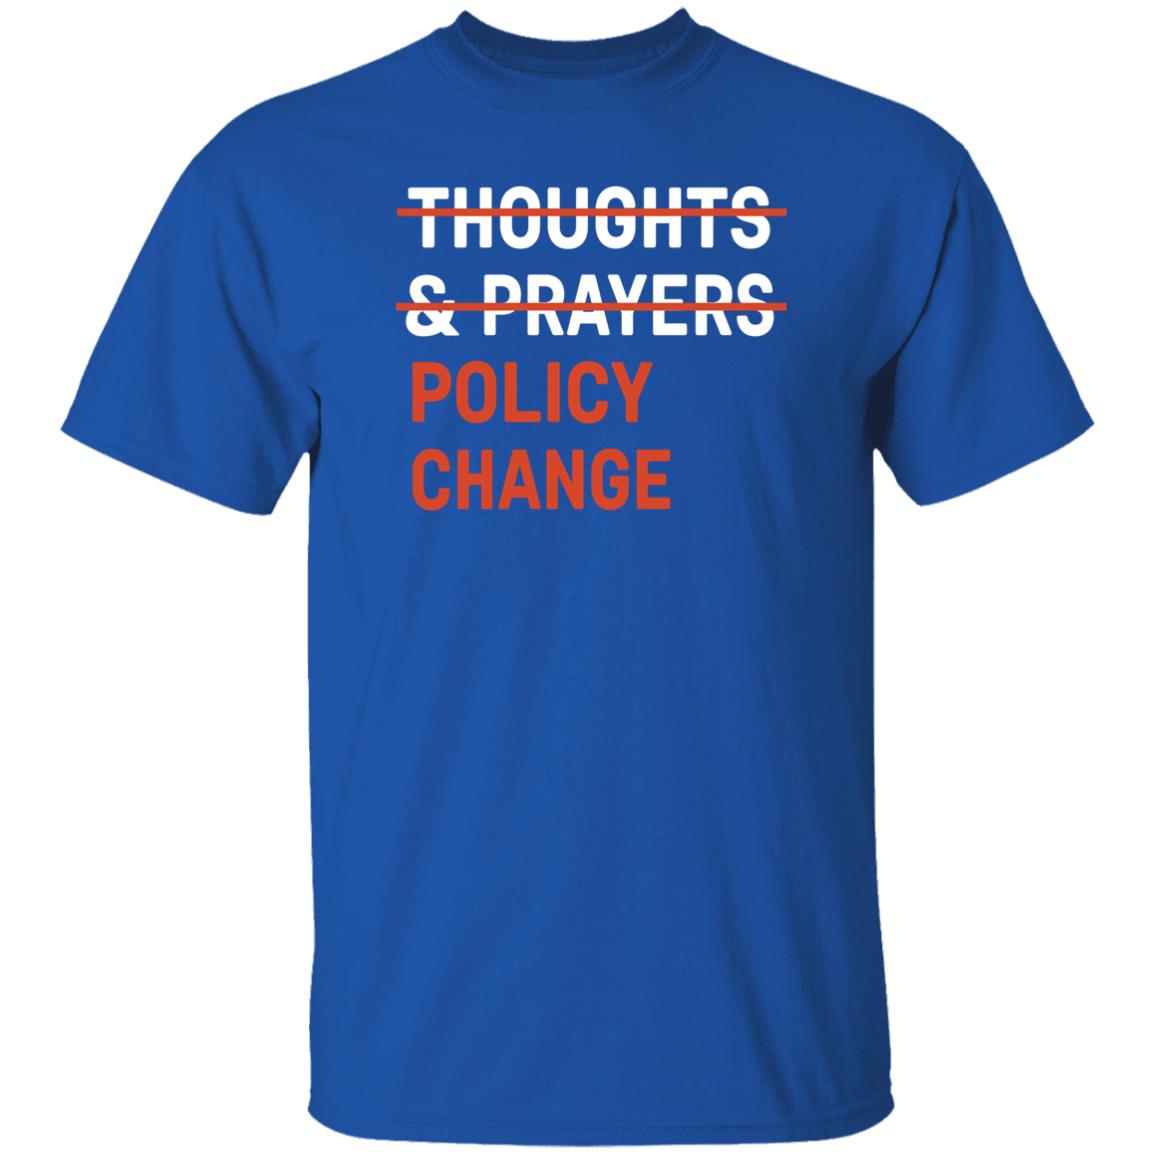 Tony Cope Moms Demand Action Thoughts Prayers Policy Change Shirt